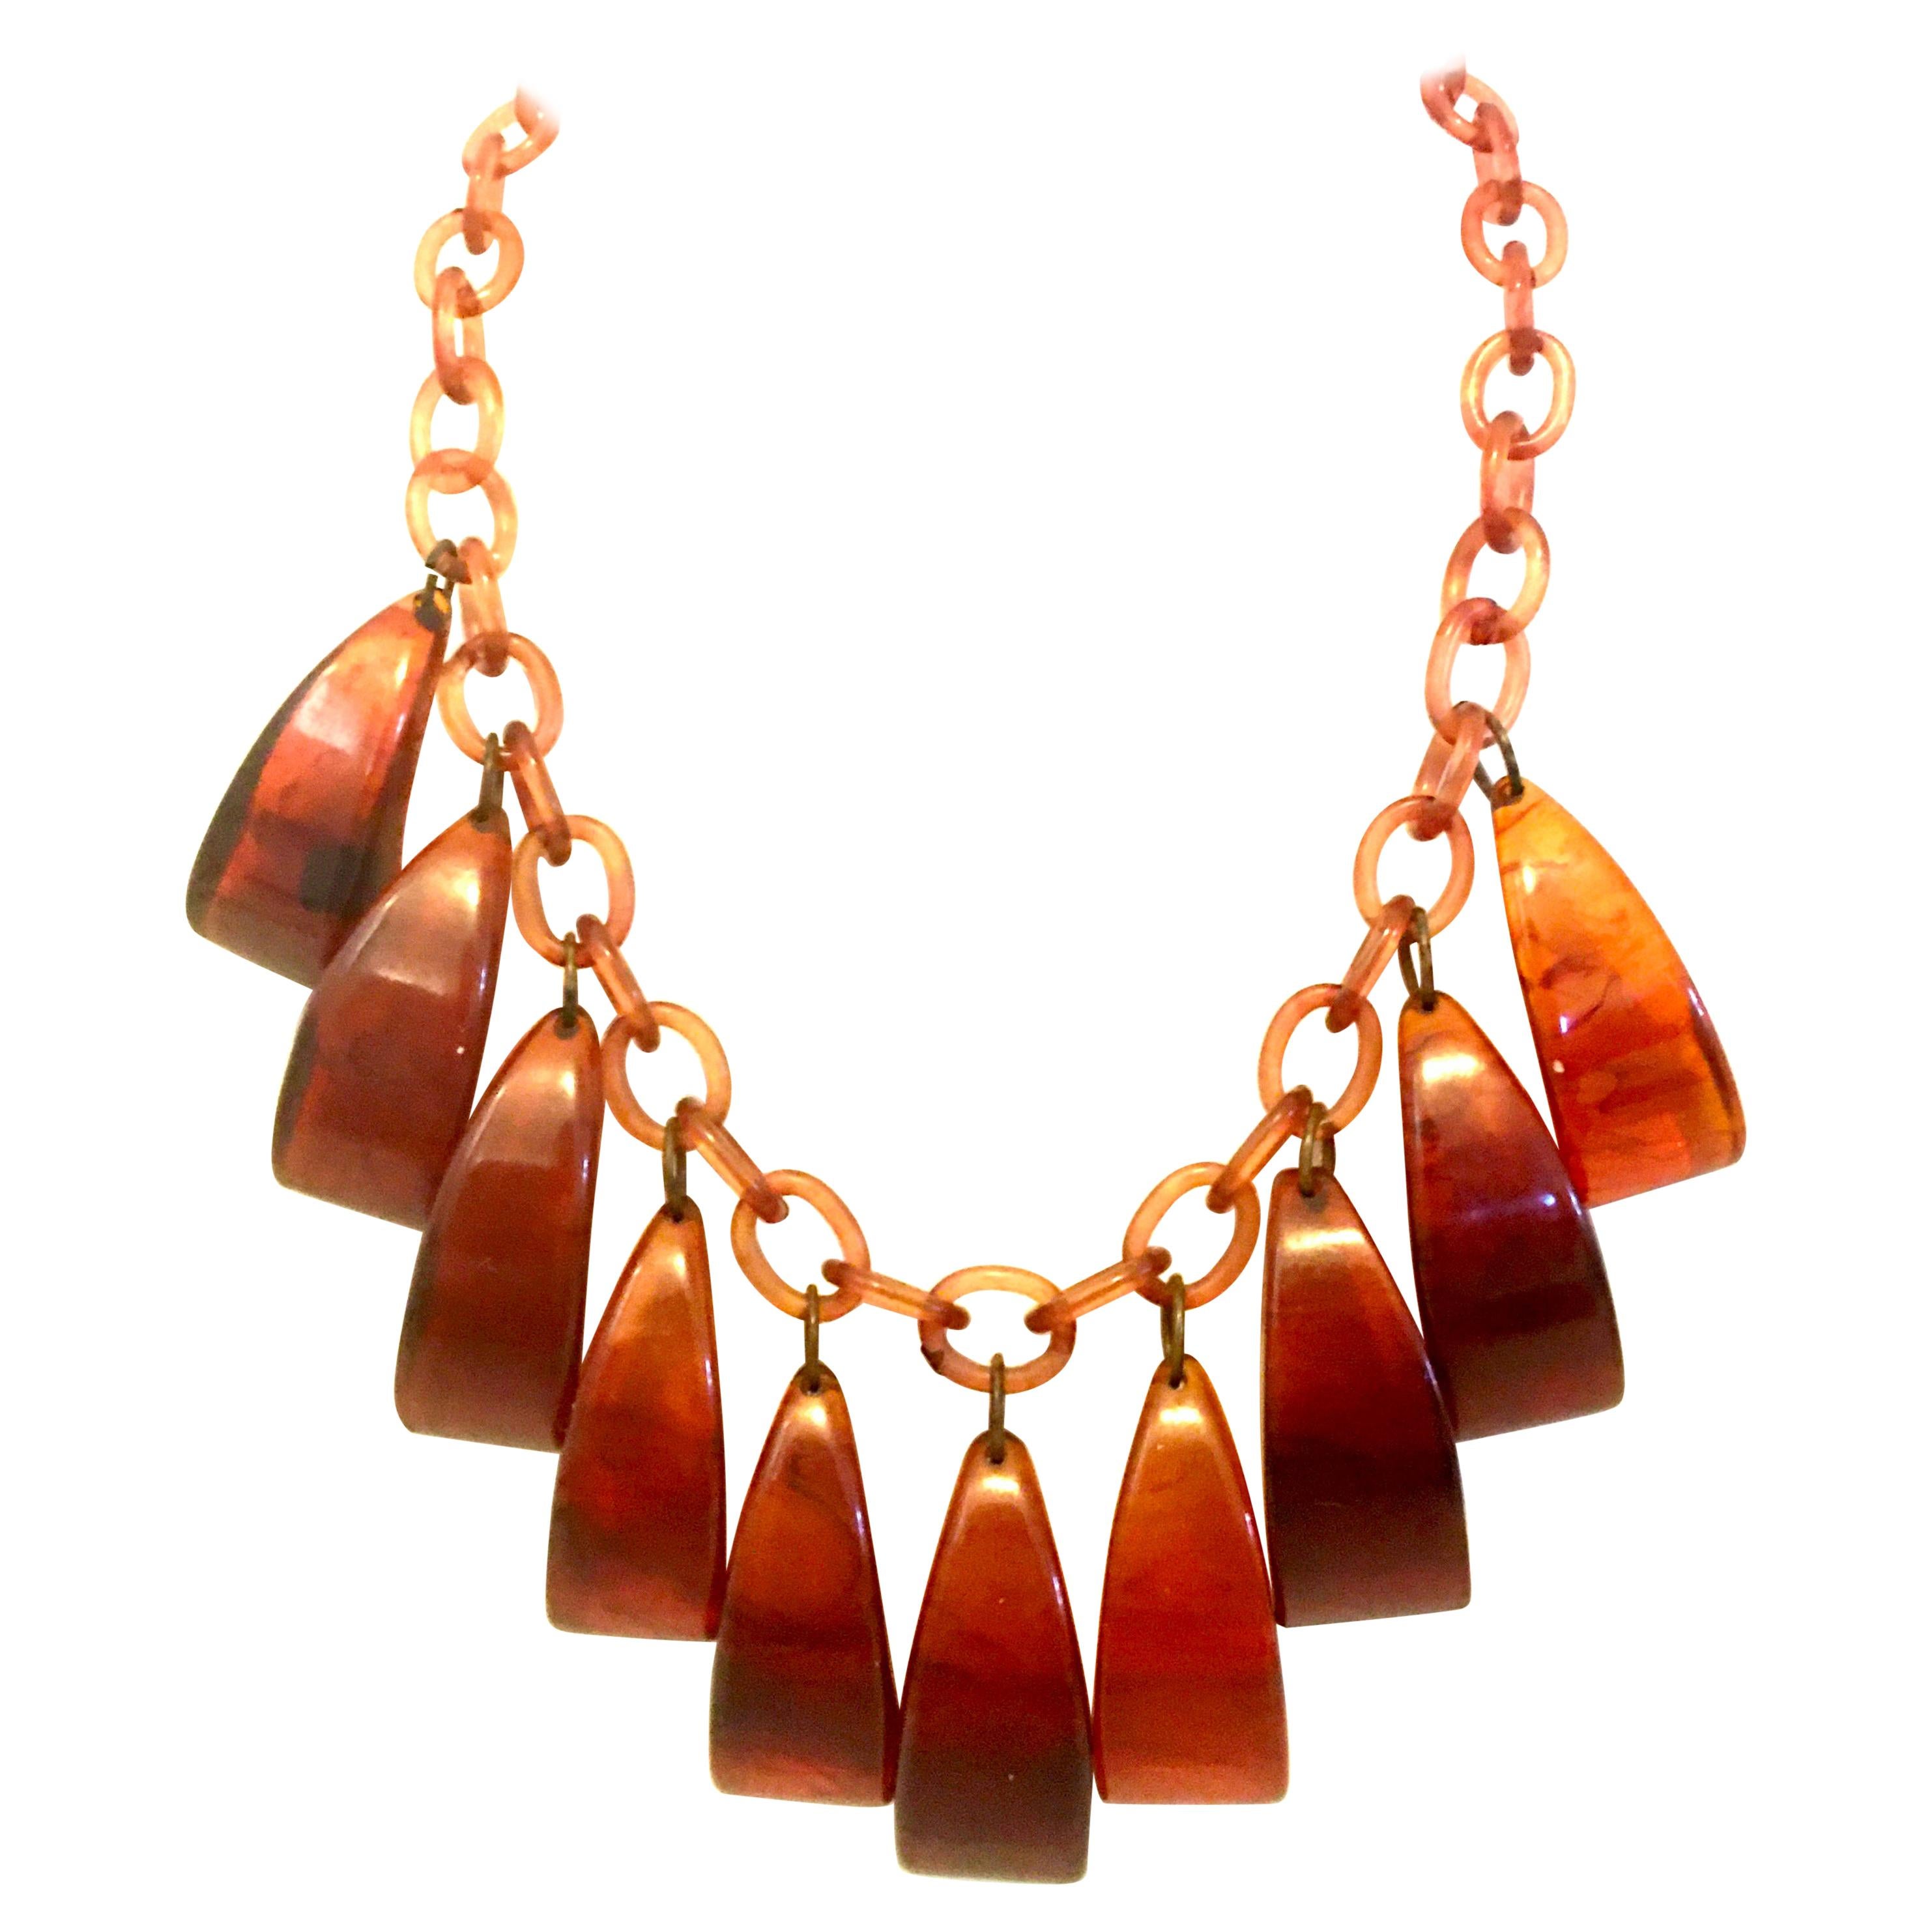 Mid-20th Century Art Deco Root Beer Bakelite & Celluloid Chain Link Necklace For Sale